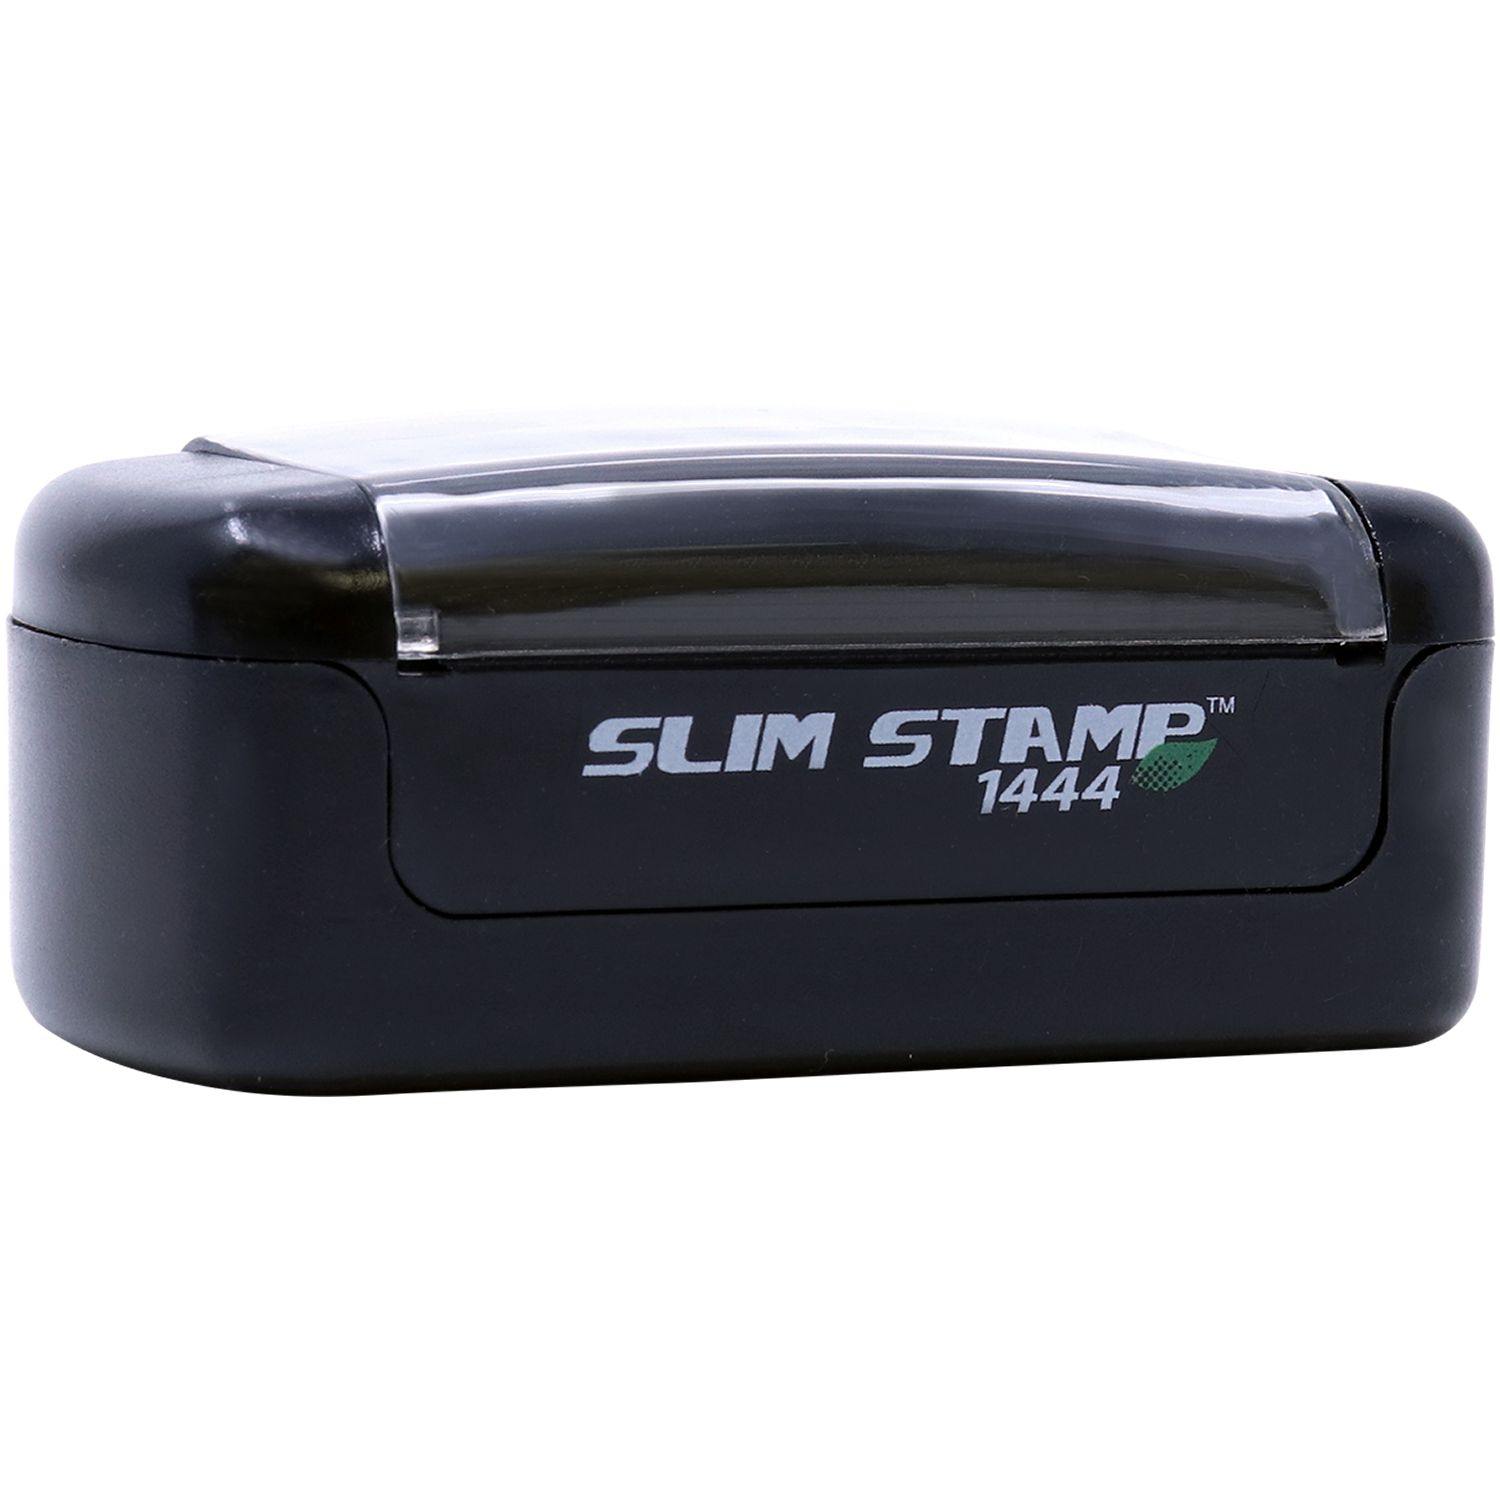 Slim Pre Inked Air Mail Stamp - Engineer Seal Stamps - Brand_Slim, Impression Size_Small, Stamp Type_Pre-Inked Stamp, Type of Use_Postal & Mailing, Type of Use_Shipping & Receiving